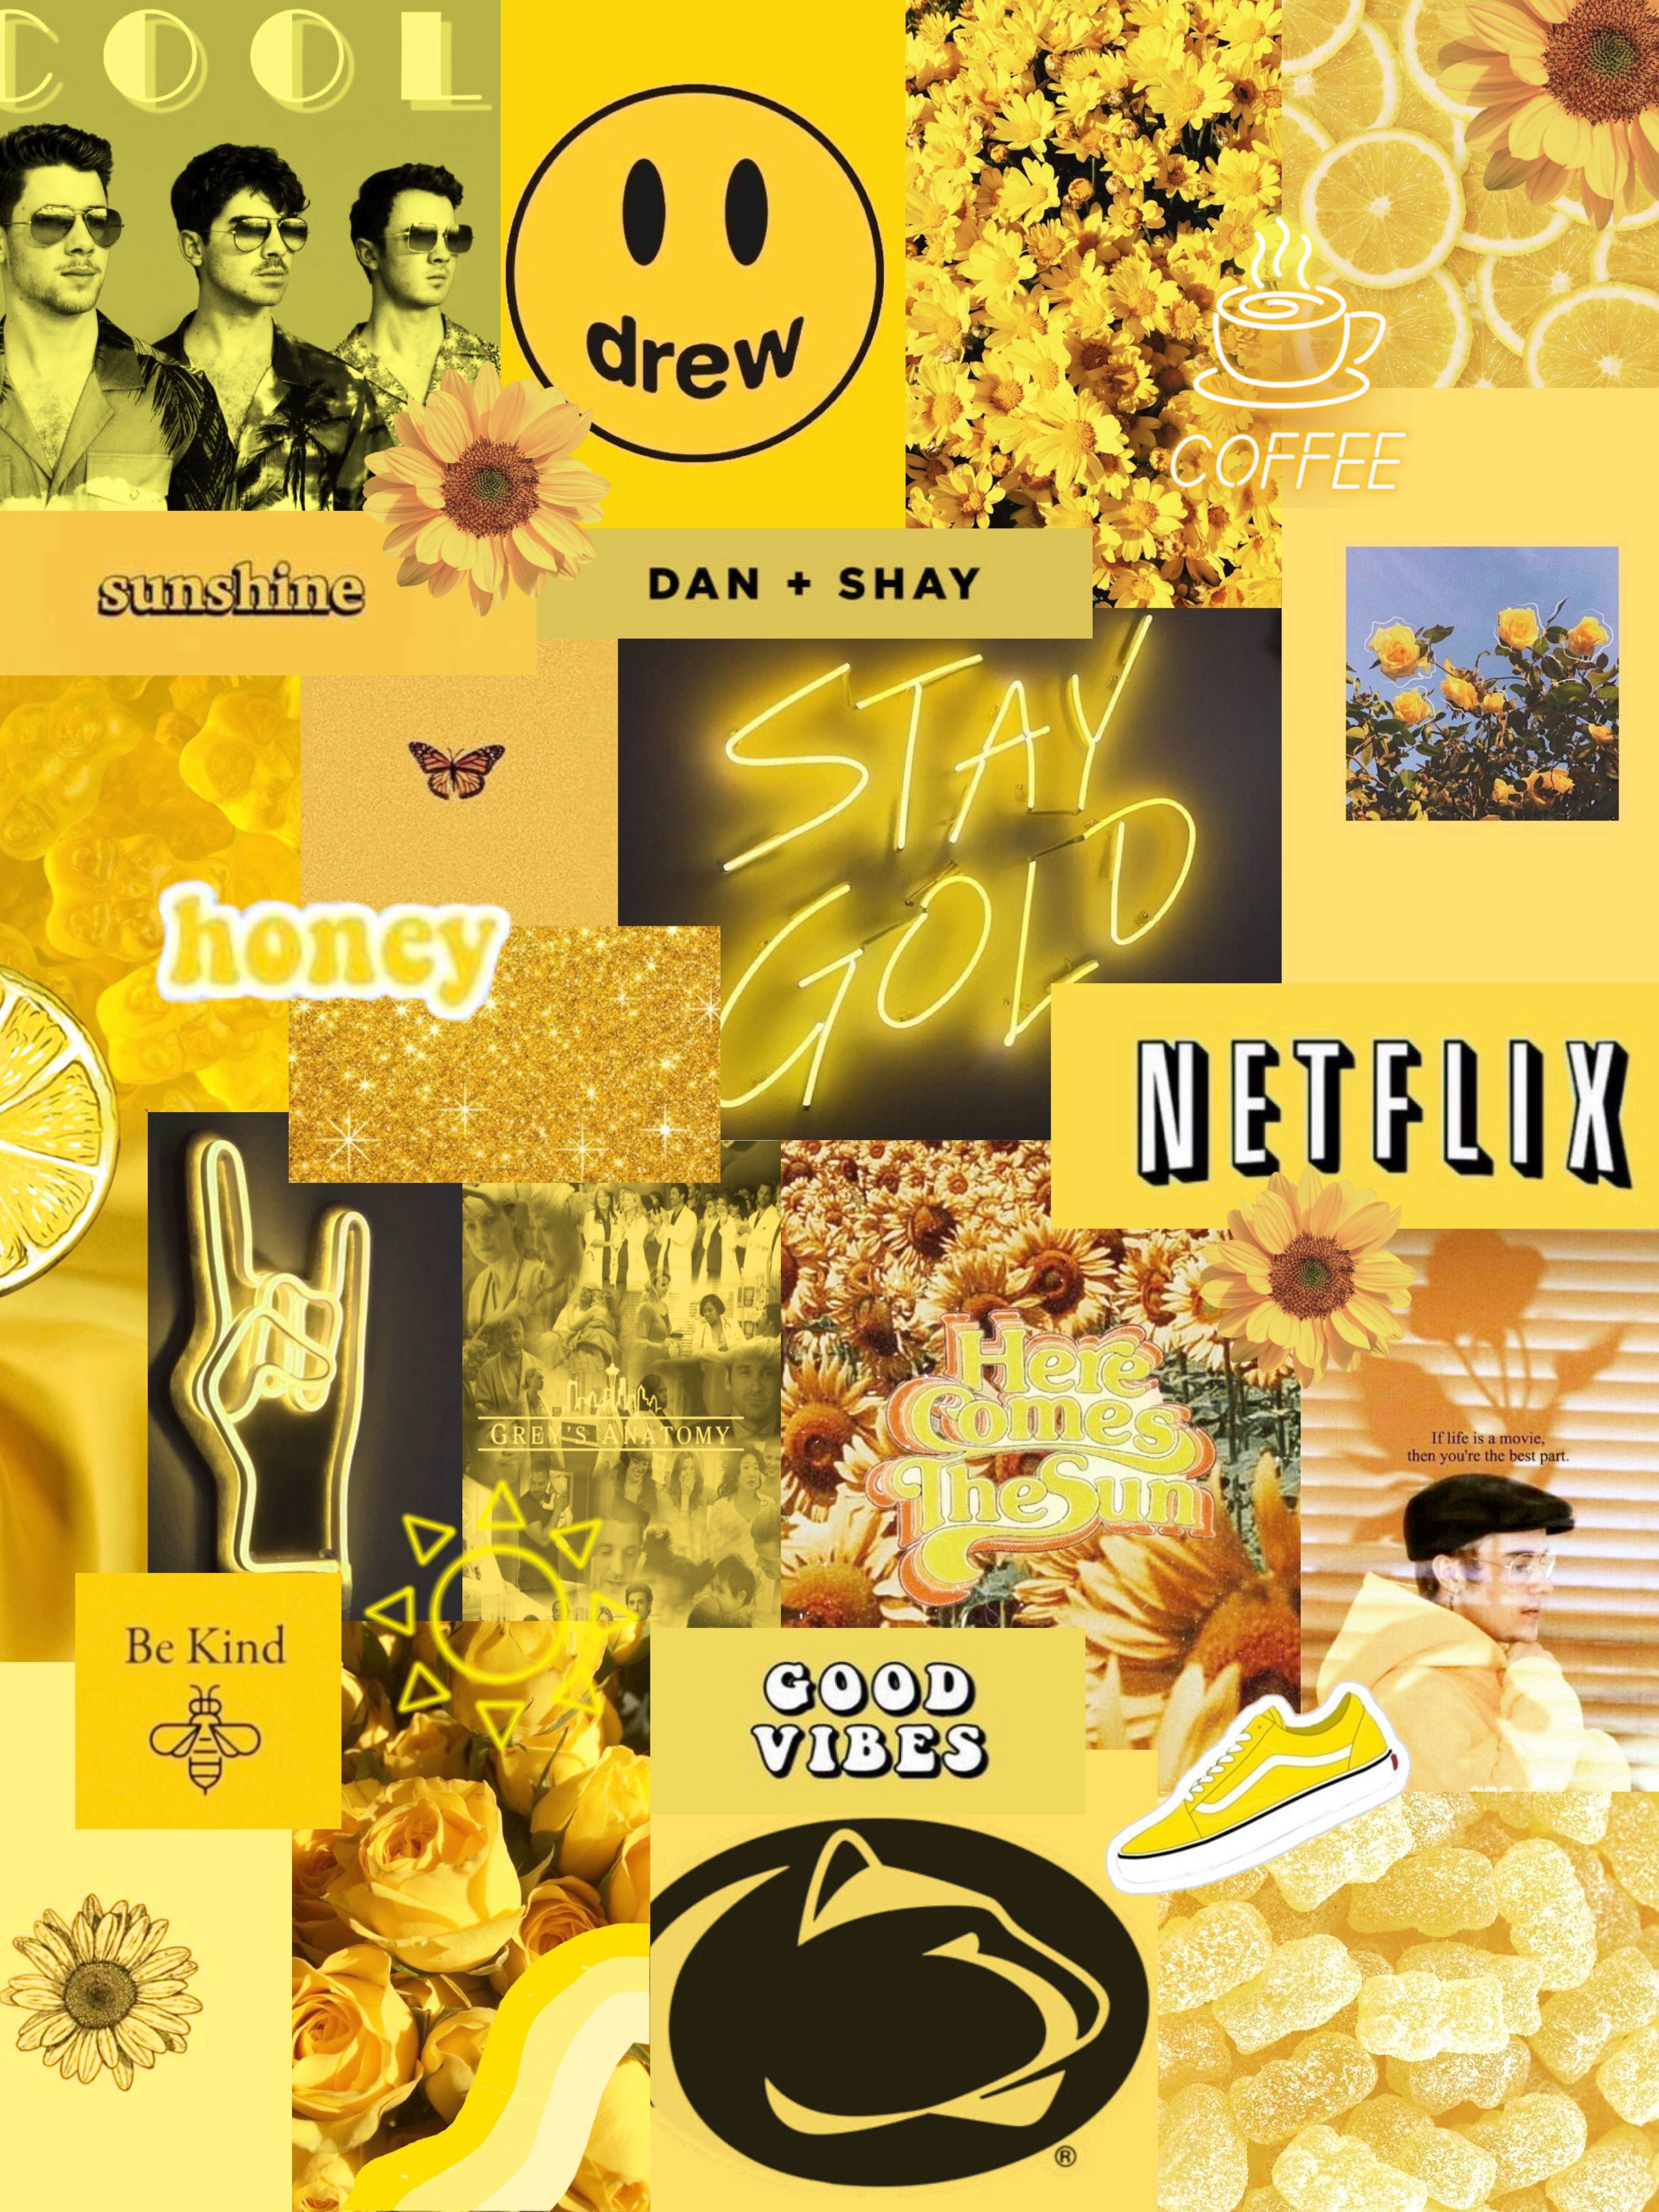 A collage of yellow aesthetic pictures including sunshine, honey, a smiley face, and the words 'Stay Gold'. - Netflix, honey, Grey's Anatomy, sunshine, yellow